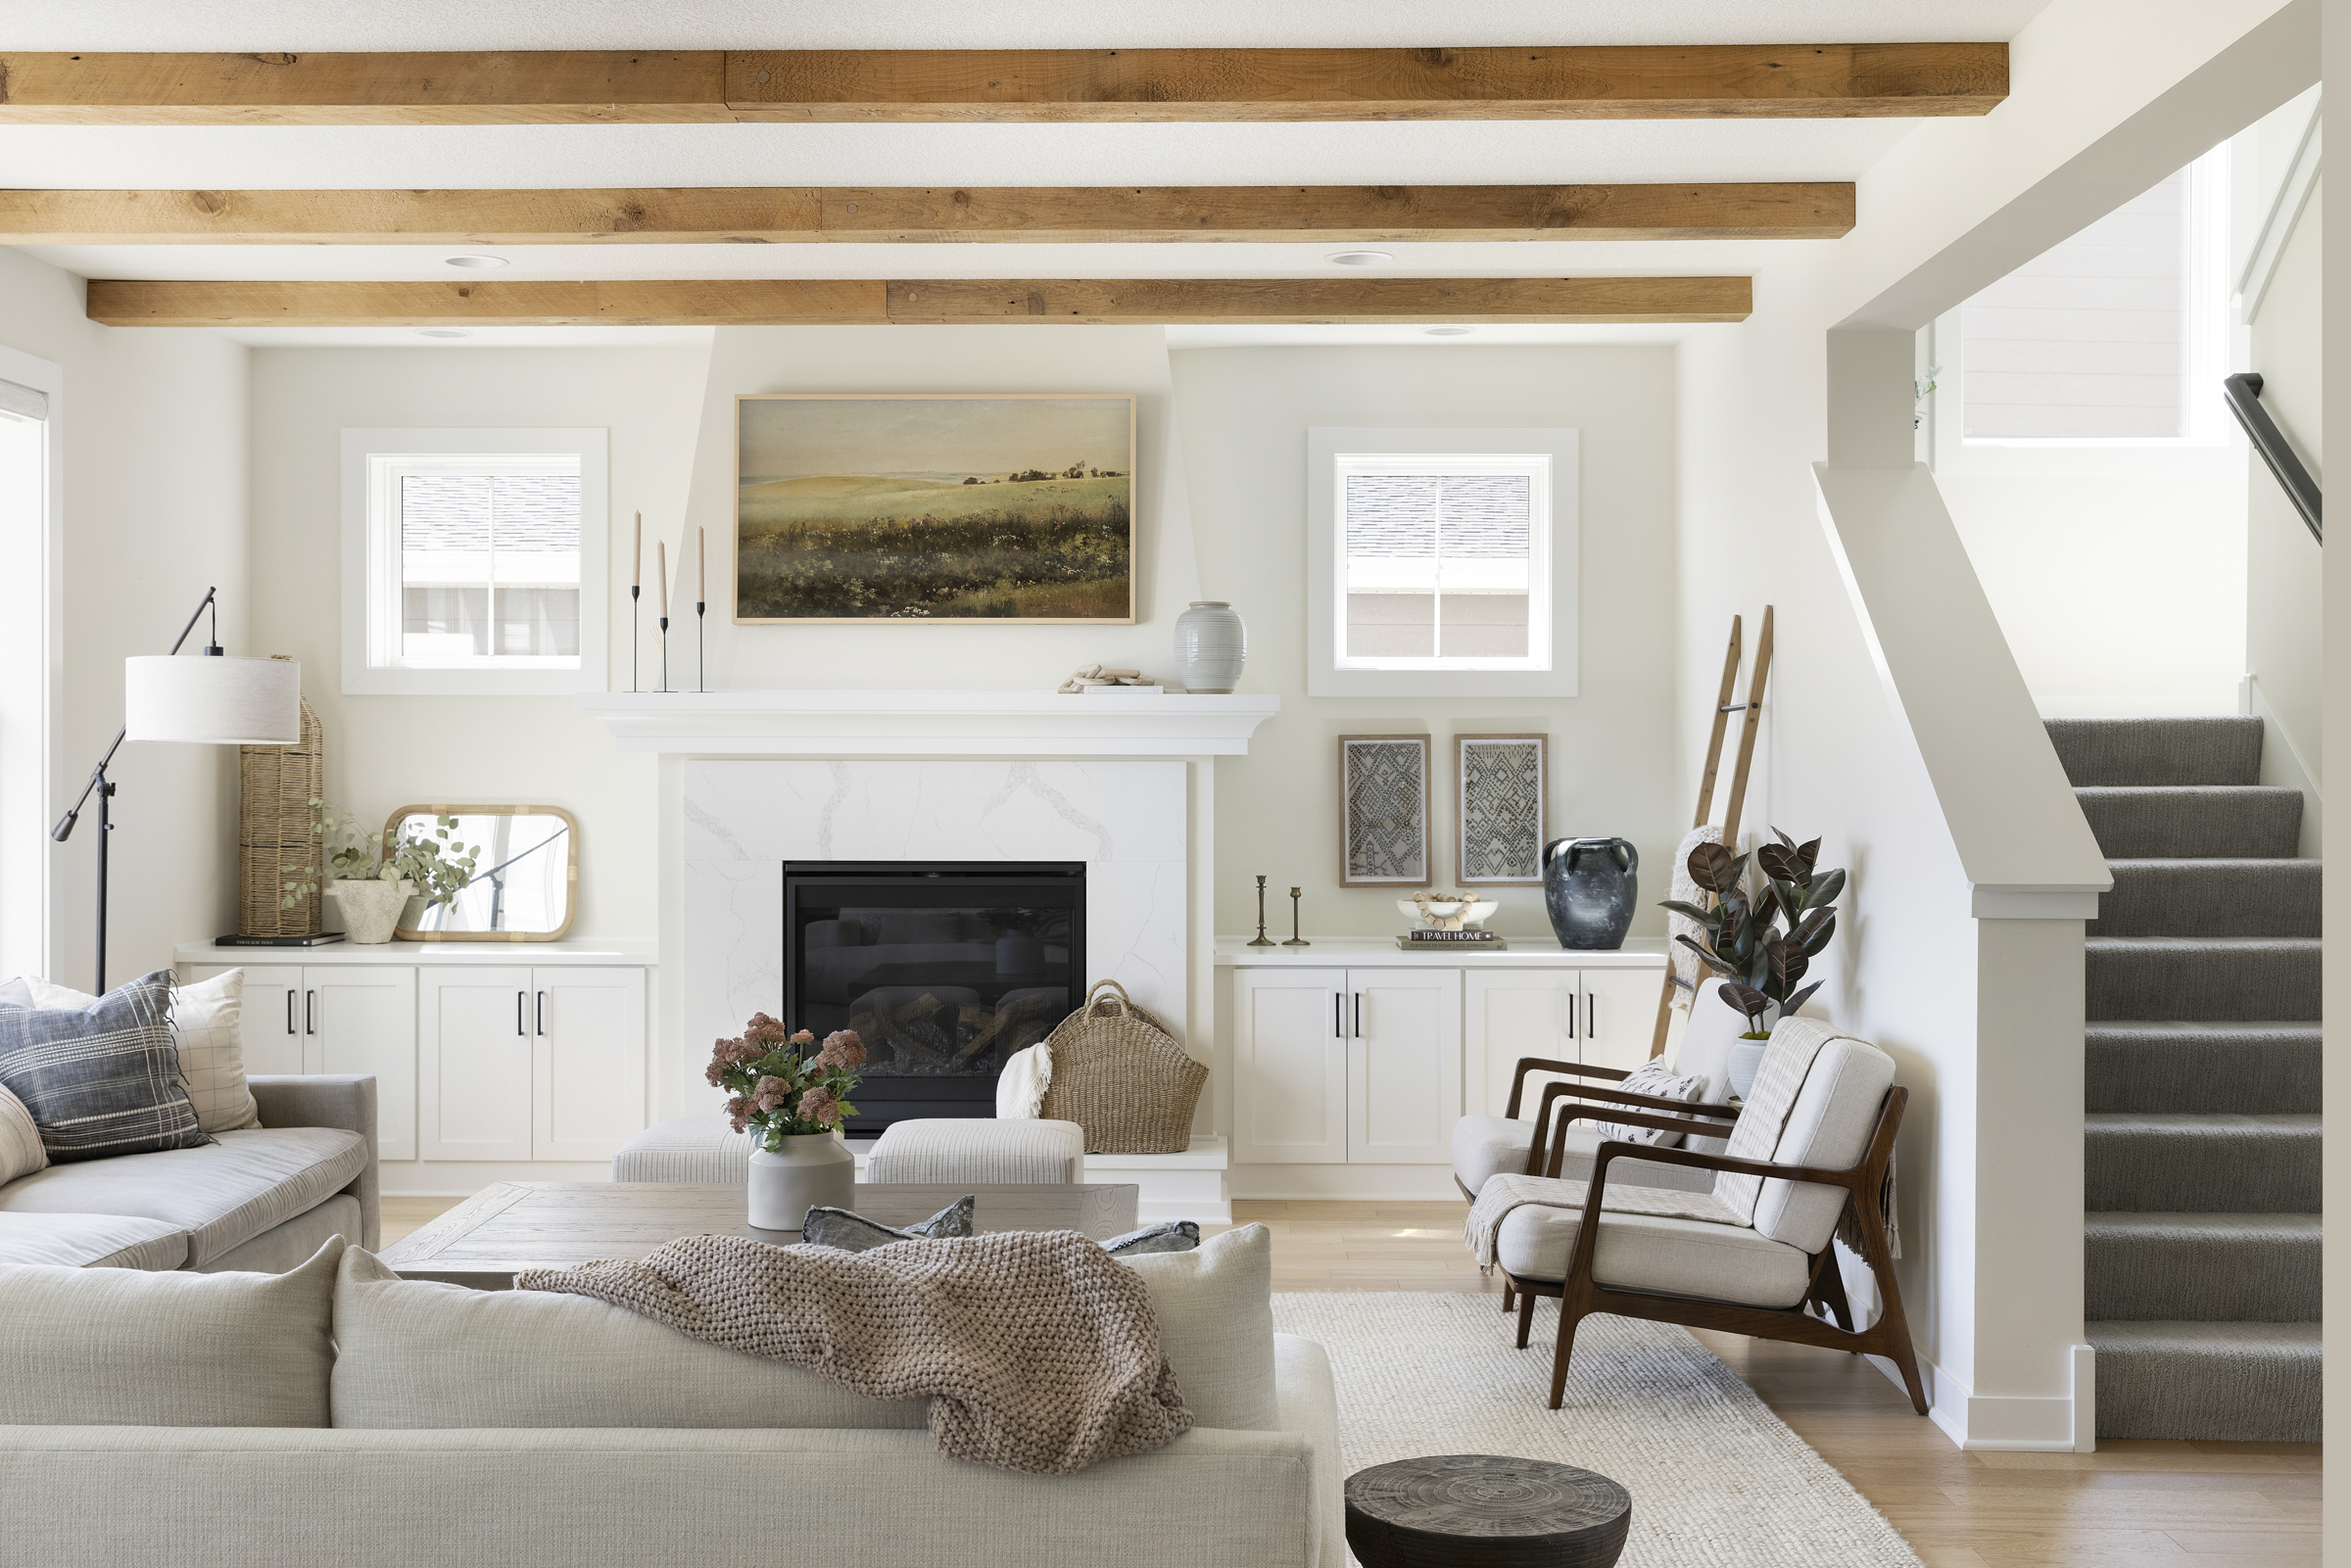 The Art of Styling Homes 14